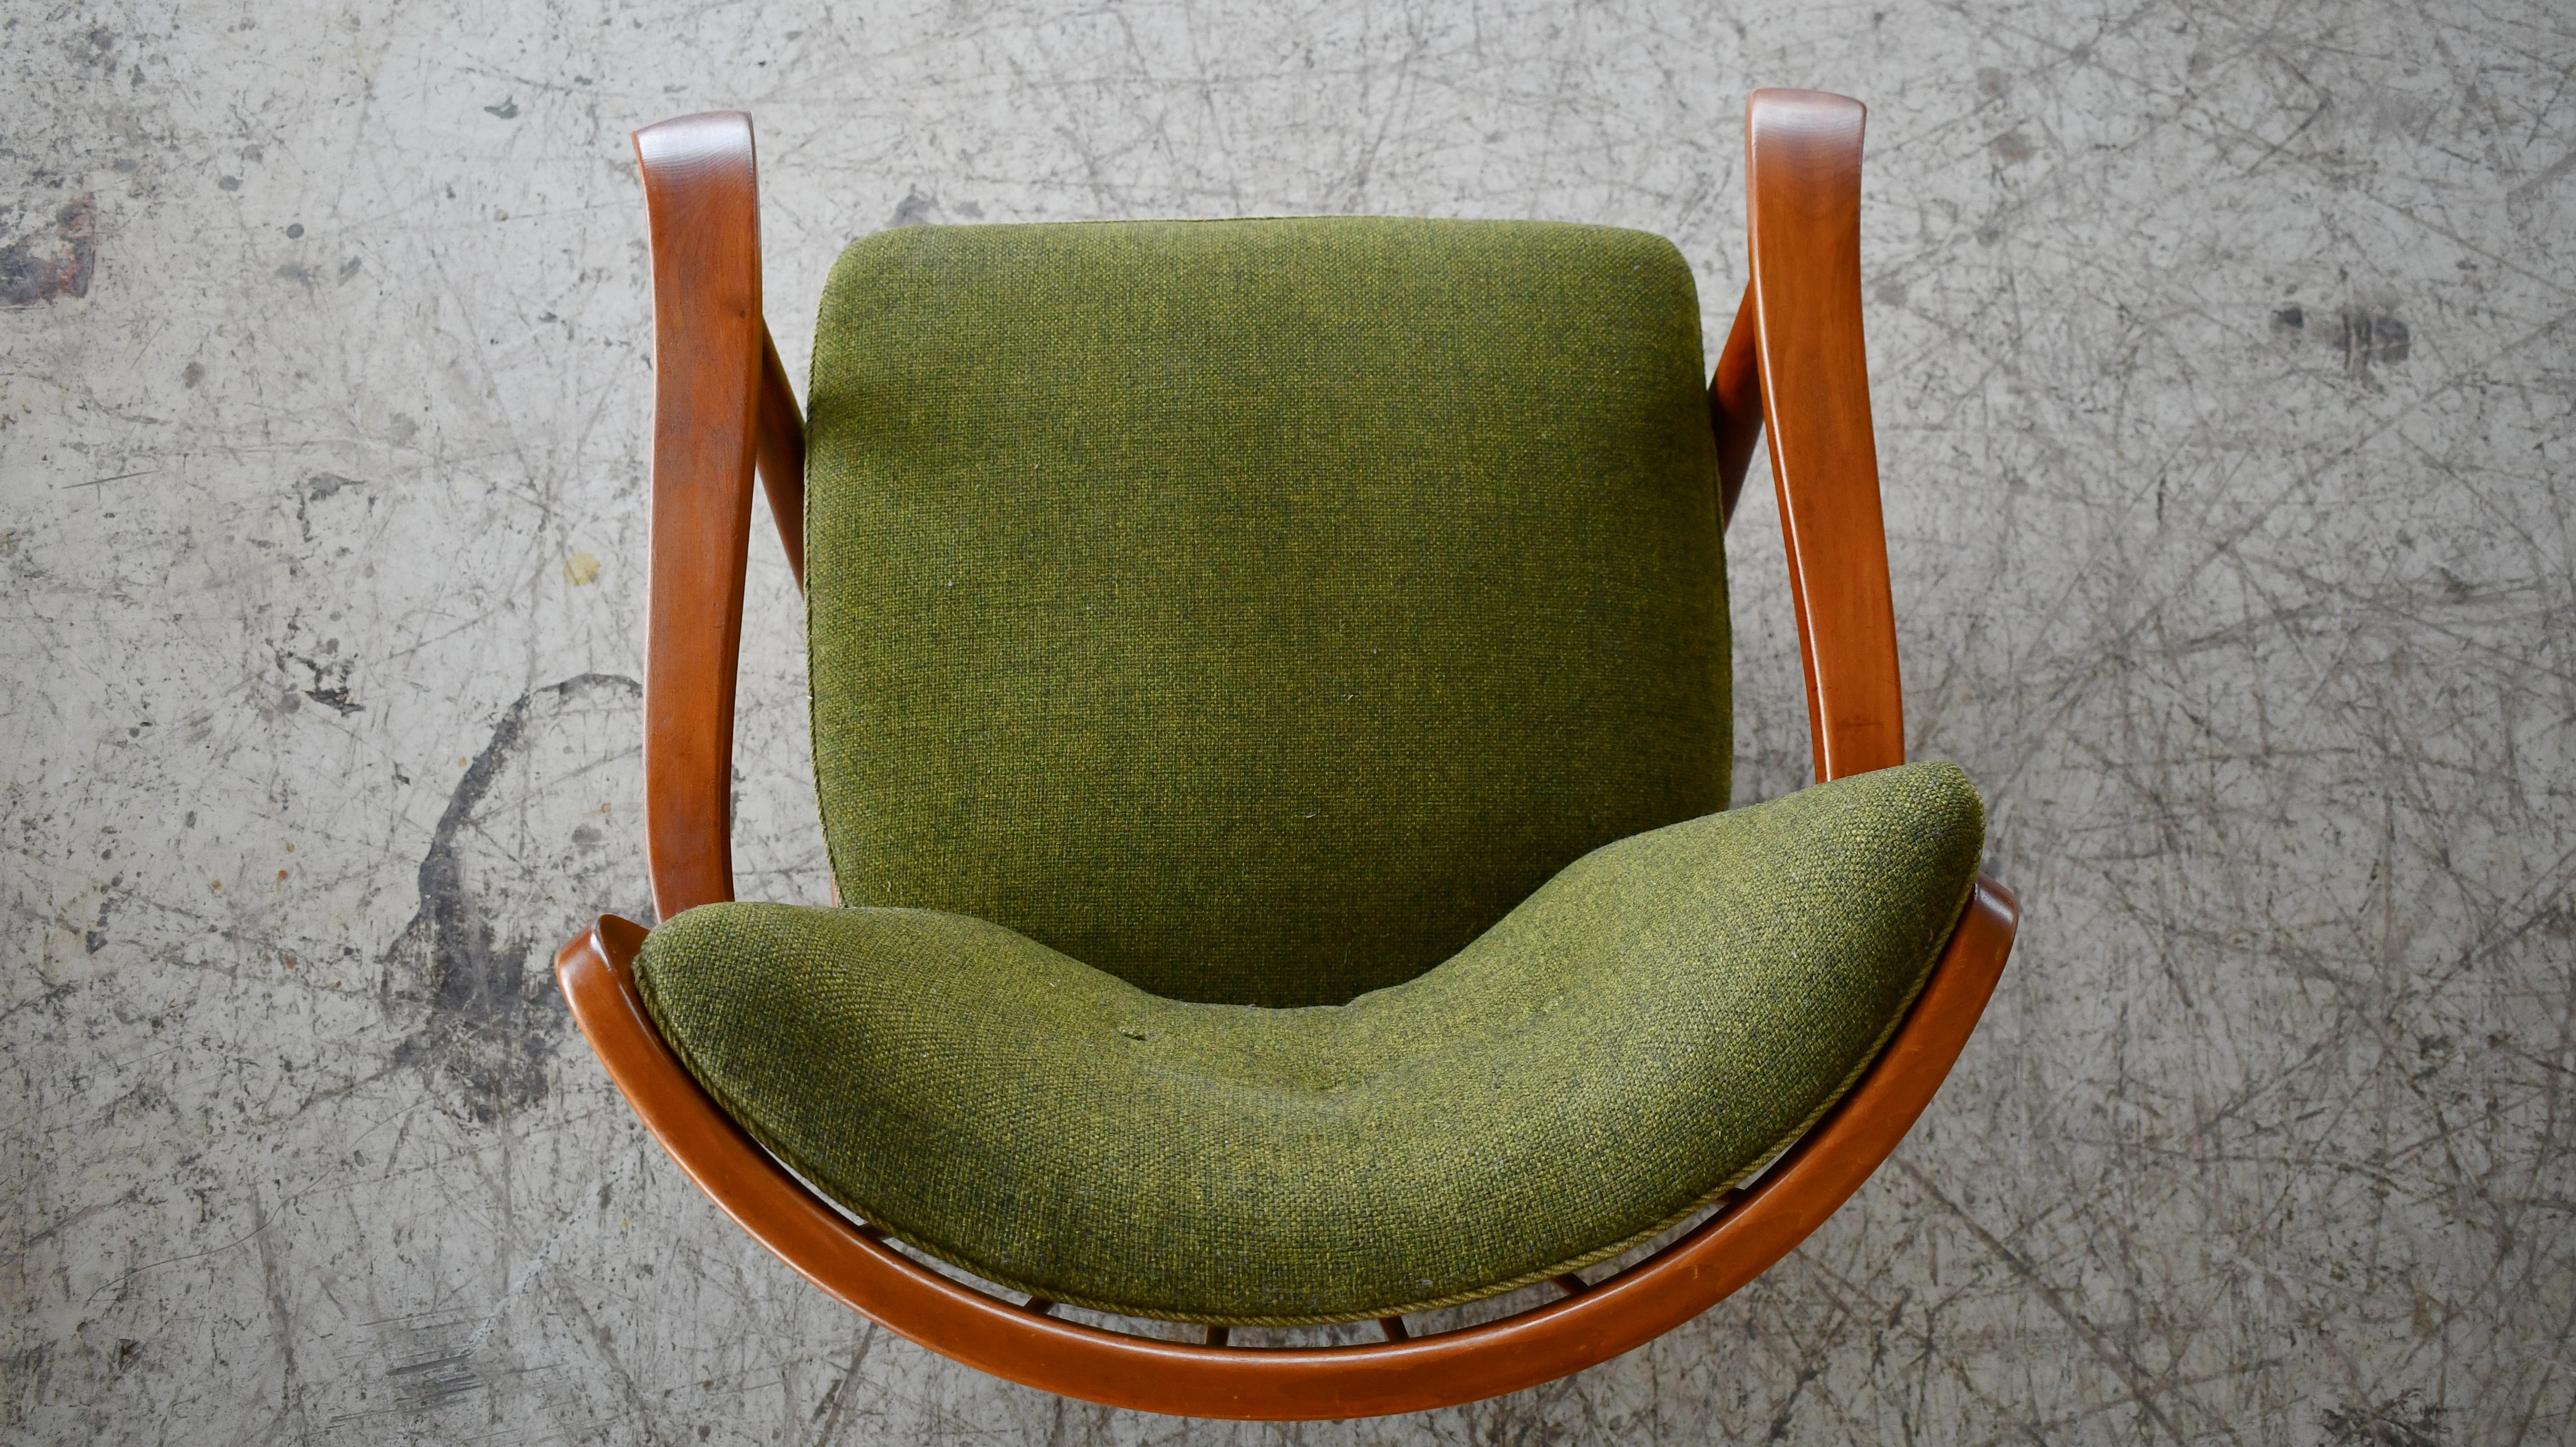 Spindle Back Lounge Chair by Frits Schlegel Model 1594 for Fritz Hansen, 1940s In Good Condition For Sale In Bridgeport, CT